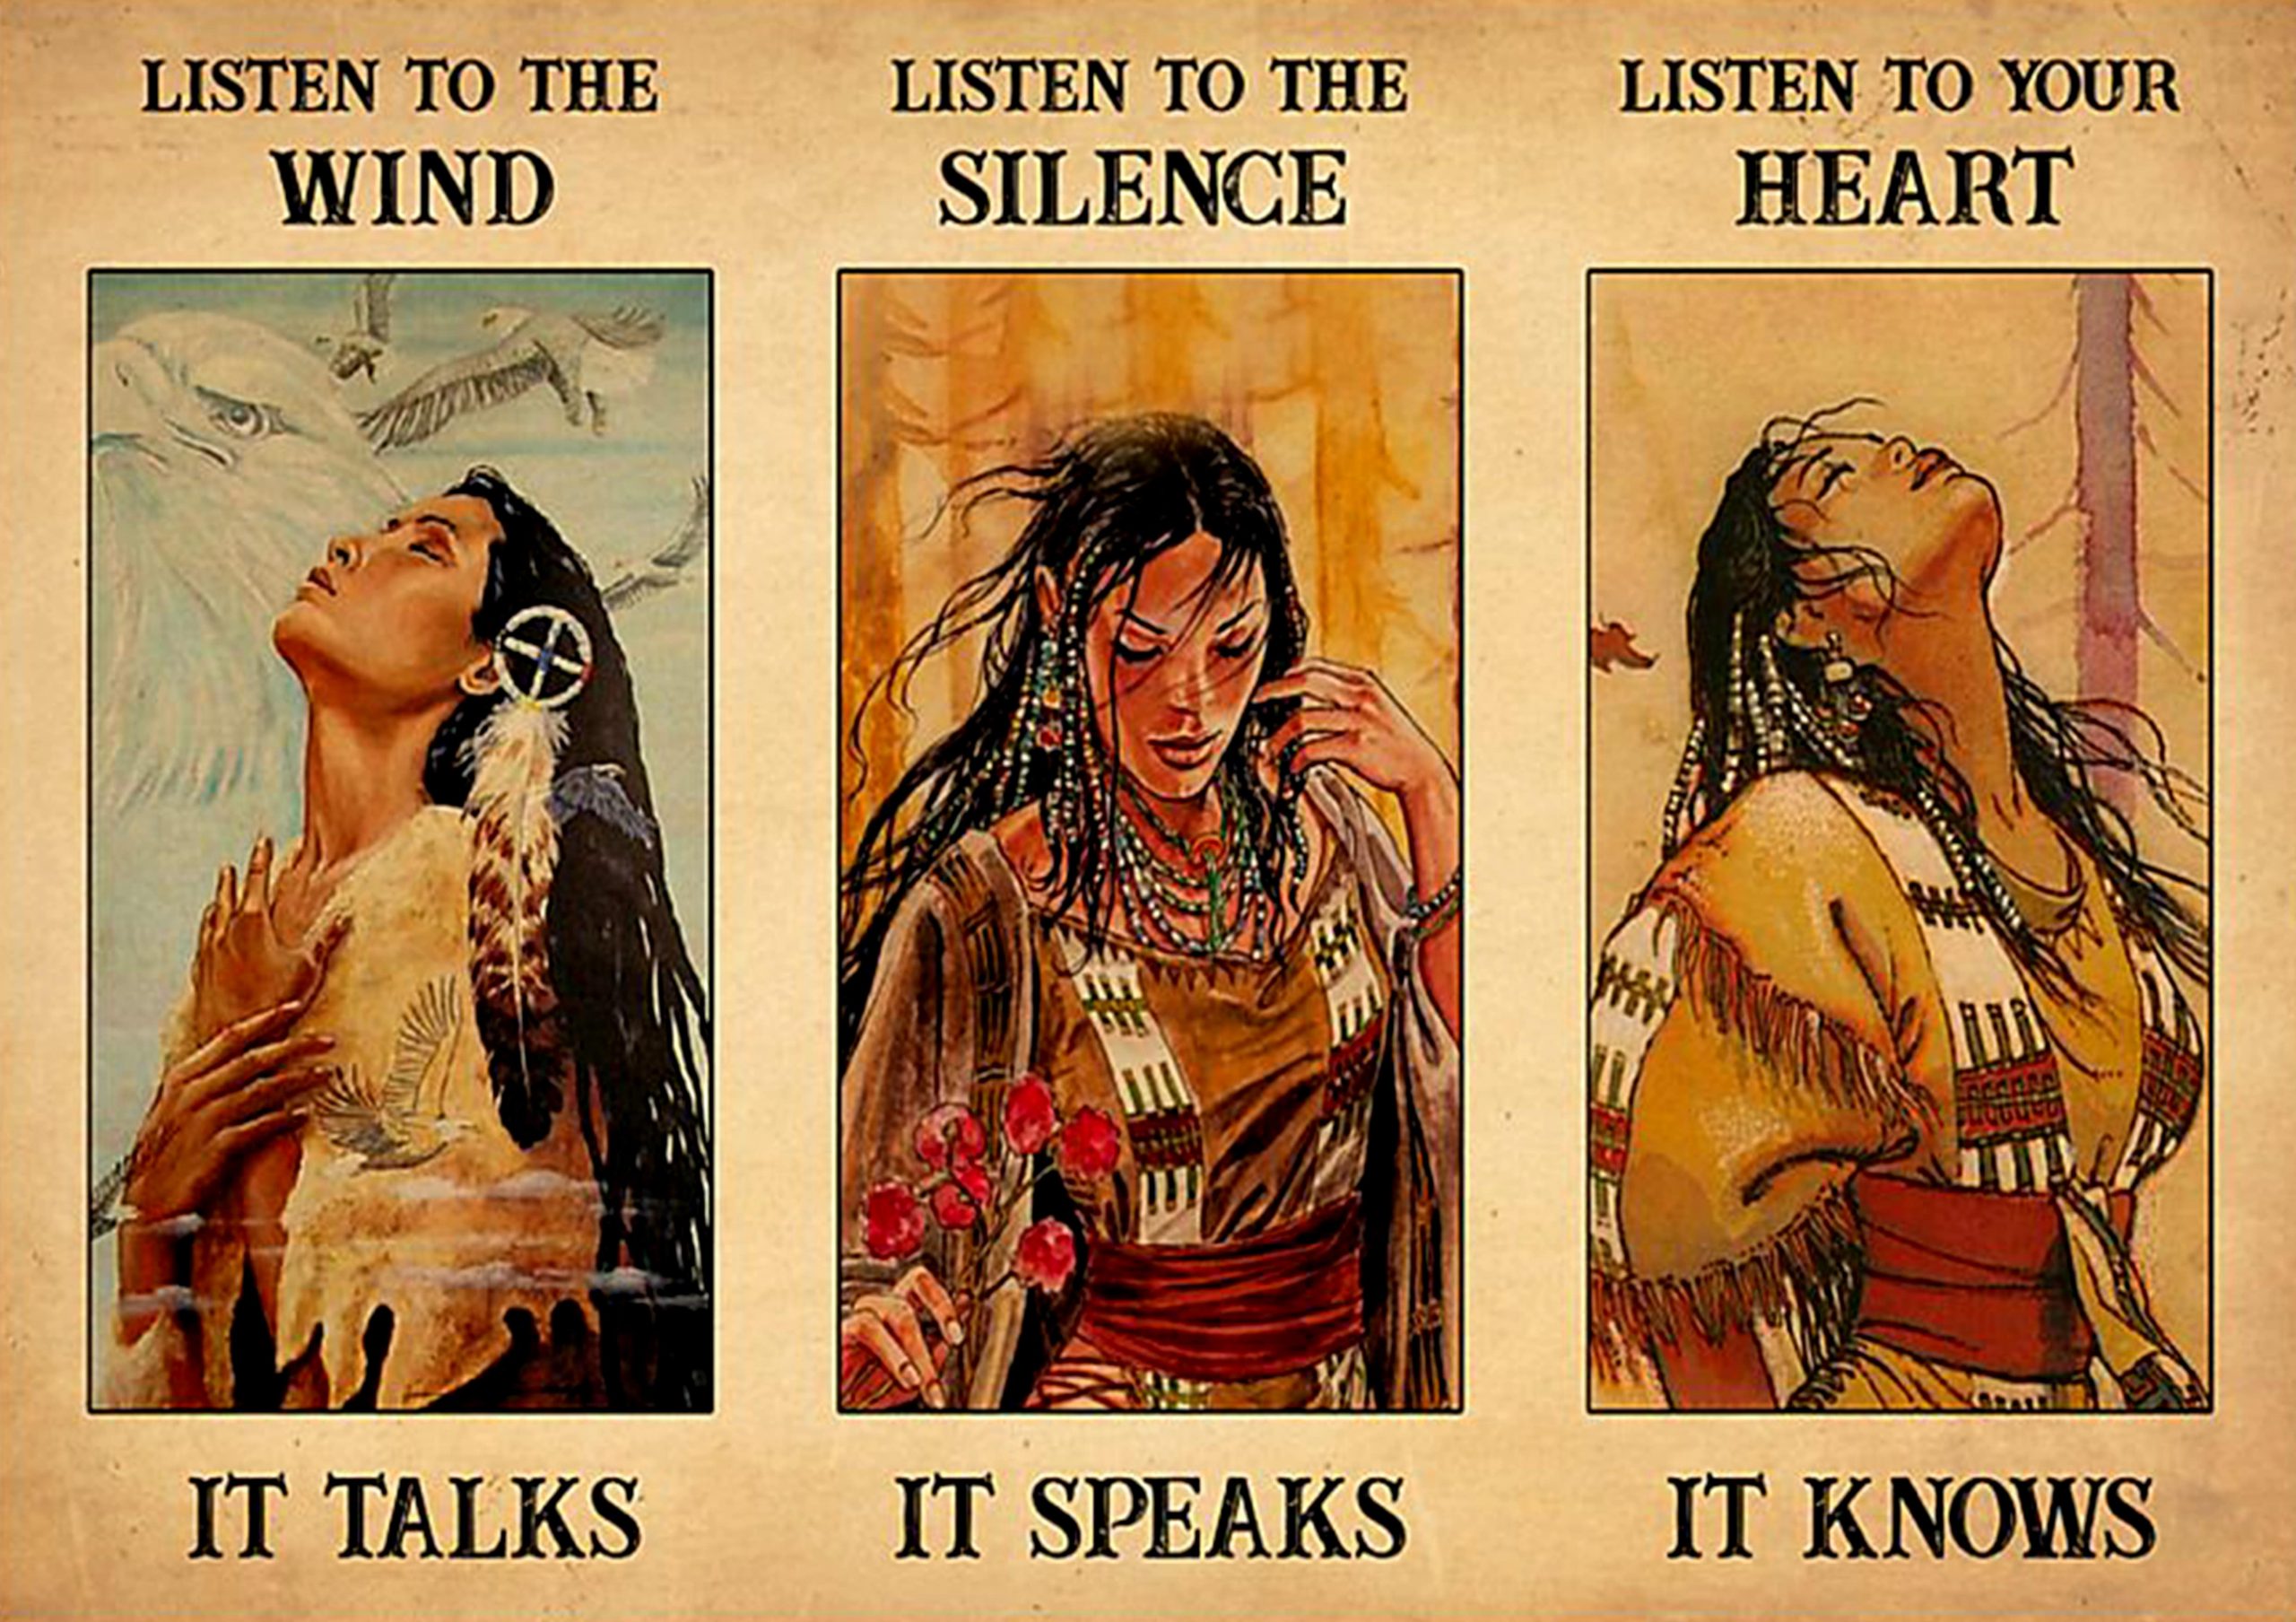 vintage native american girls listen to the wind it talks listen to the silence it speaks poster 1